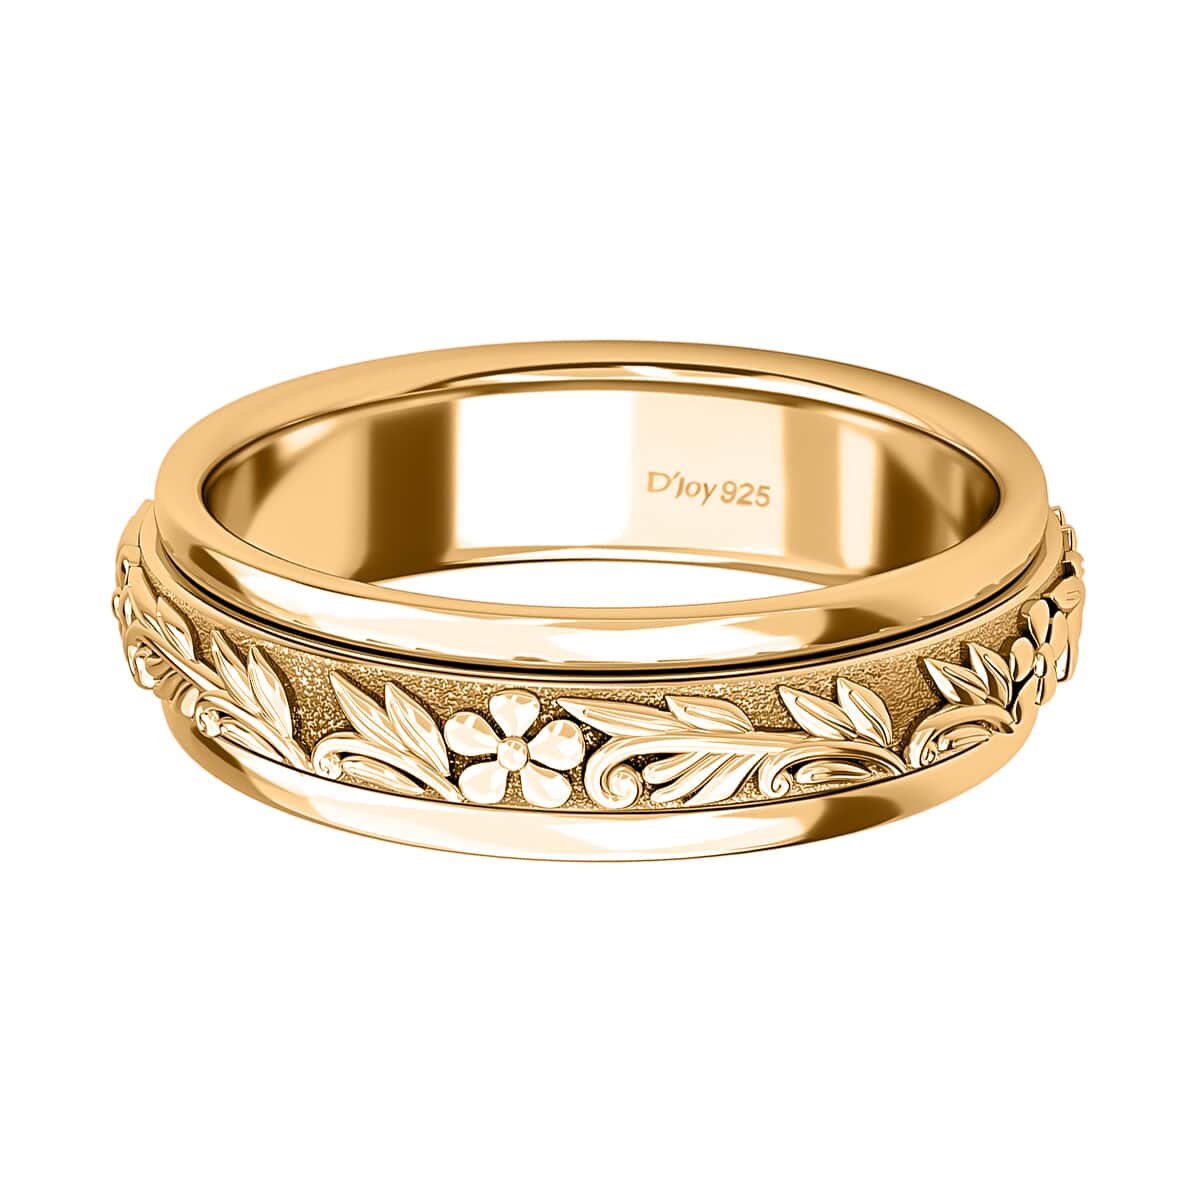 Floral Fidget Spinner Ring for Anxiety in Vermeil Yellow Gold Over Sterling Silver, Anxiety Ring for Women, Fidget Rings for Anxiety, Promise Rings 4.50 Grams image number 4